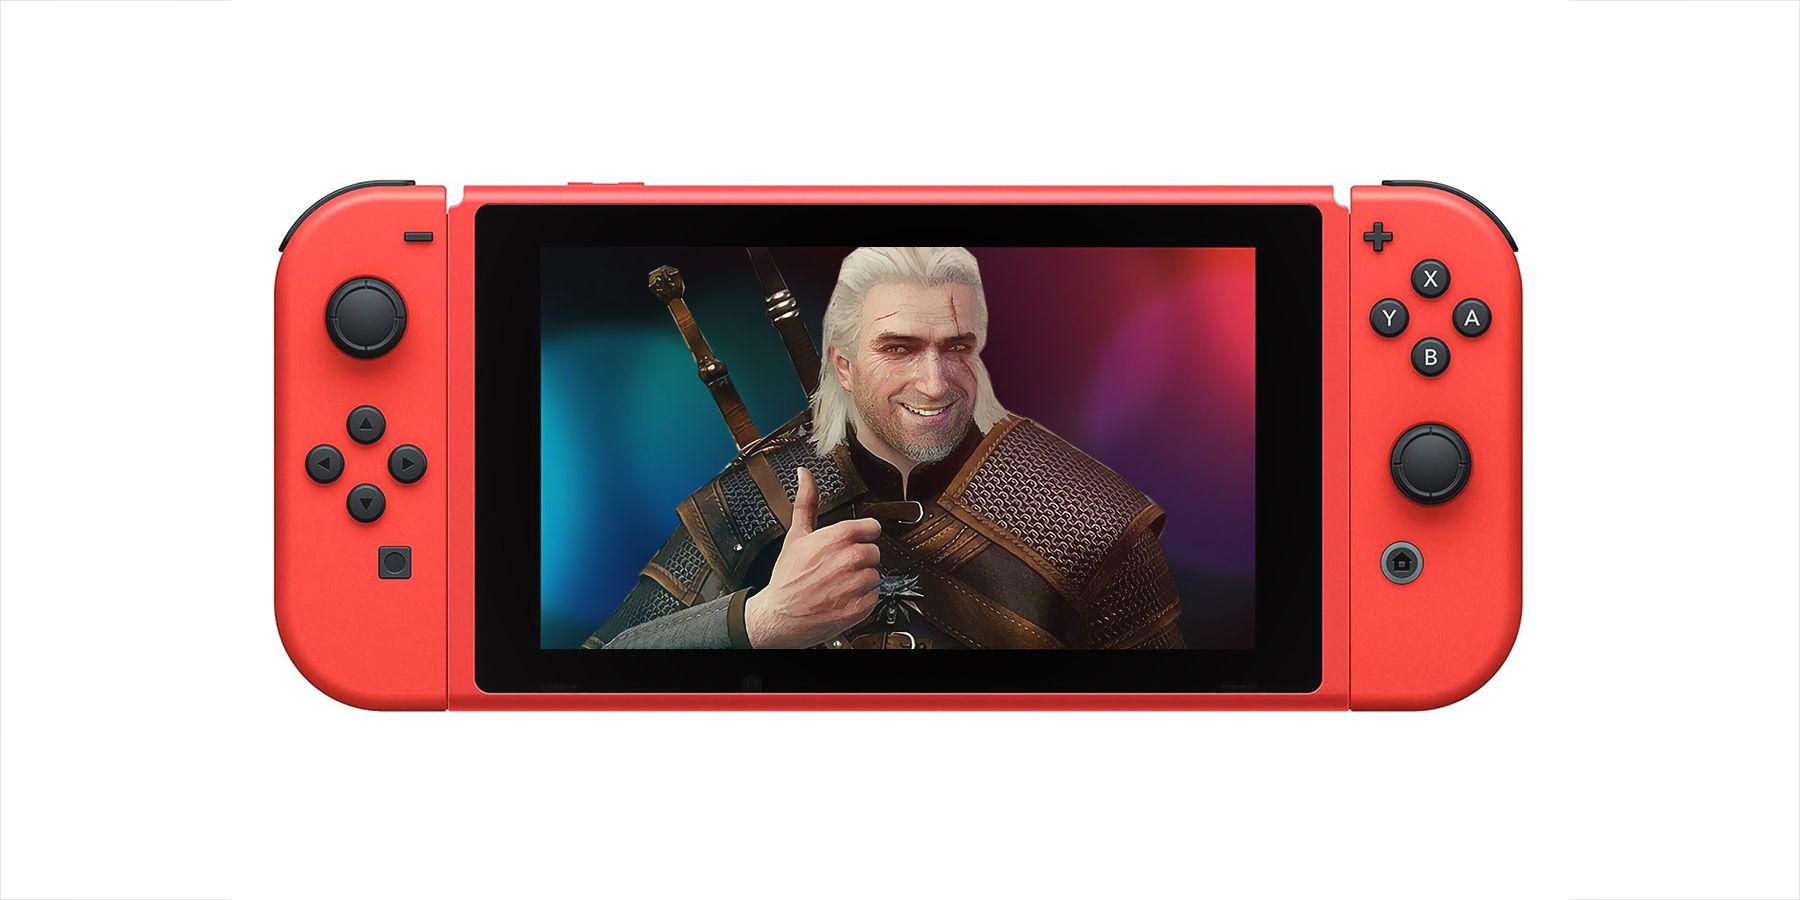 Nintendo Switch Mario Red and Blue edition displaying Geralt of Rivia giving a thumbs-up